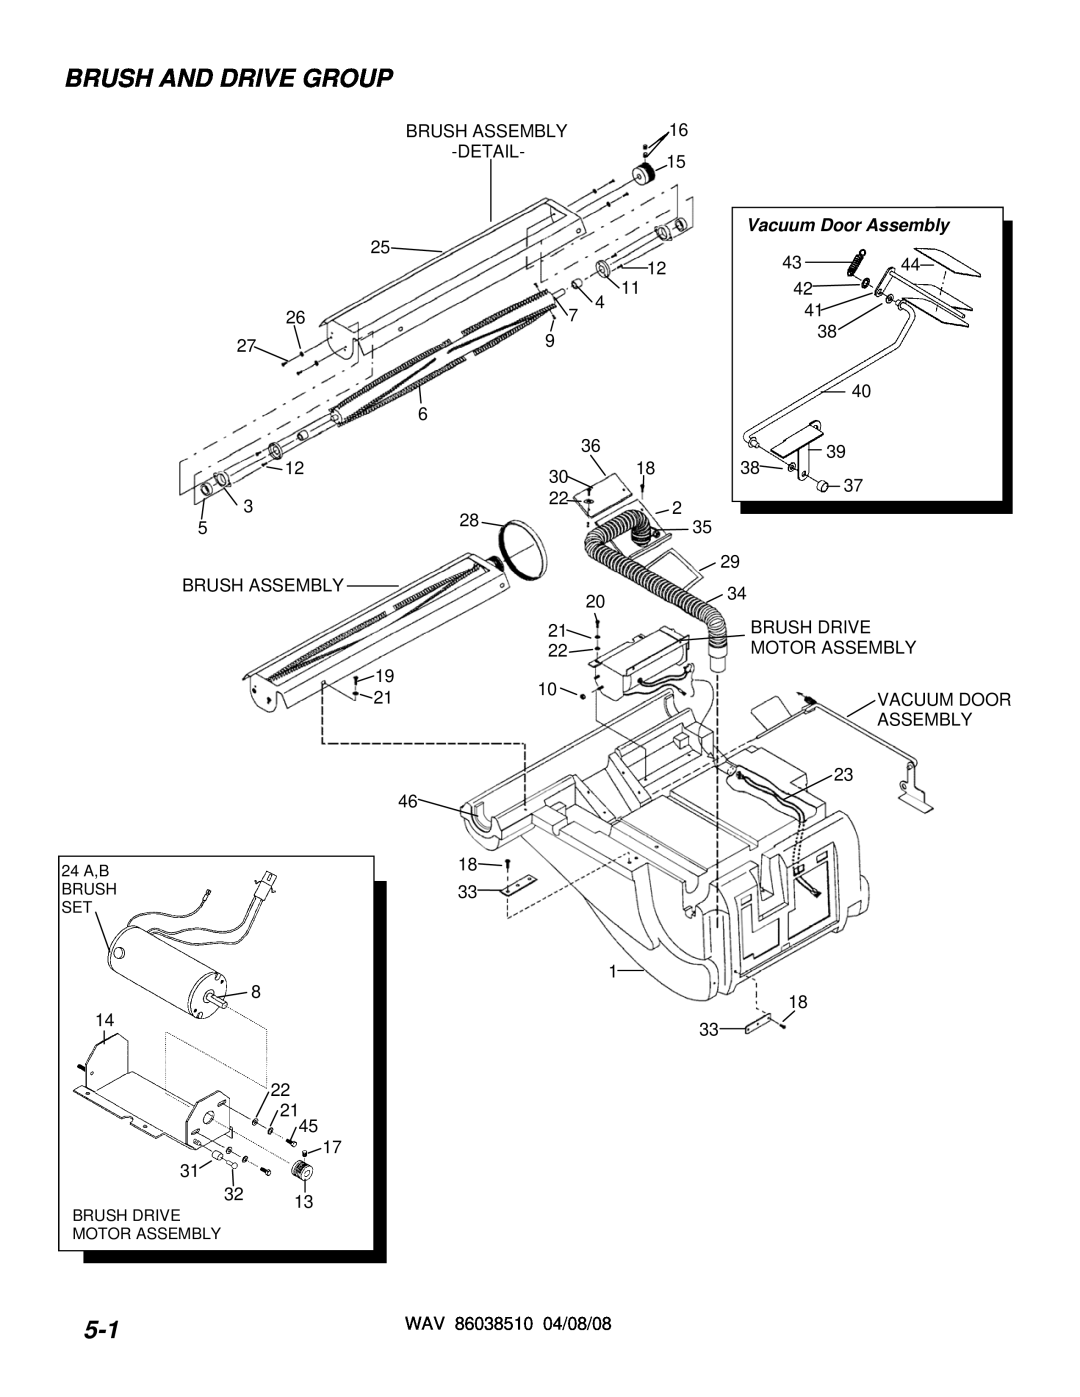 Windsor WAV 10125050 operating instructions Brush And Drive Group, Vacuum Door Assembly 